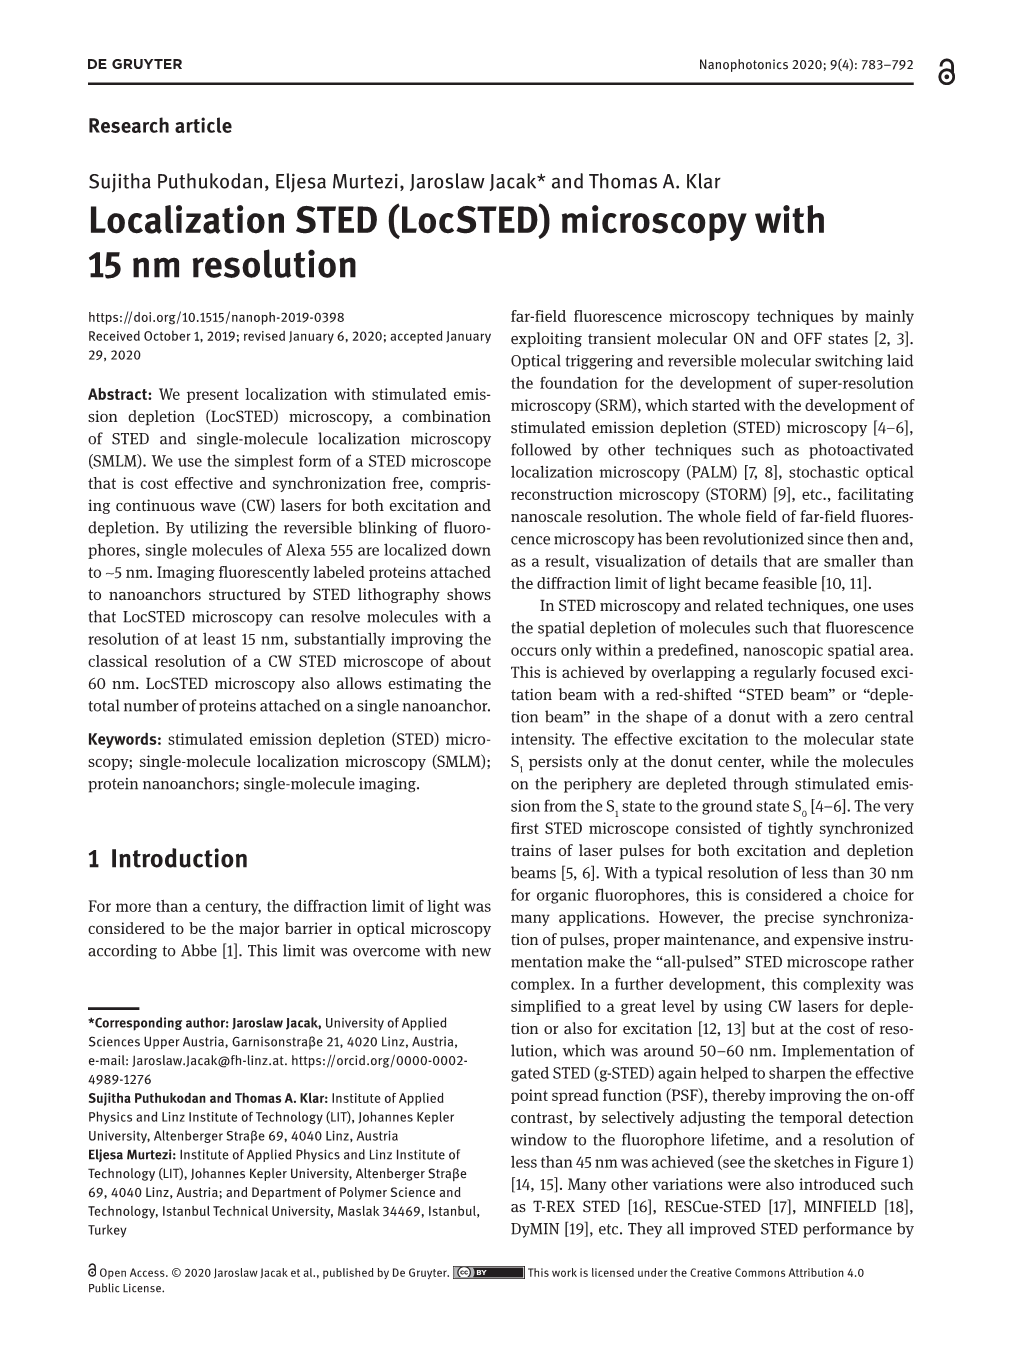 Localization STED (Locsted) Microscopy with 15 Nm Resolution